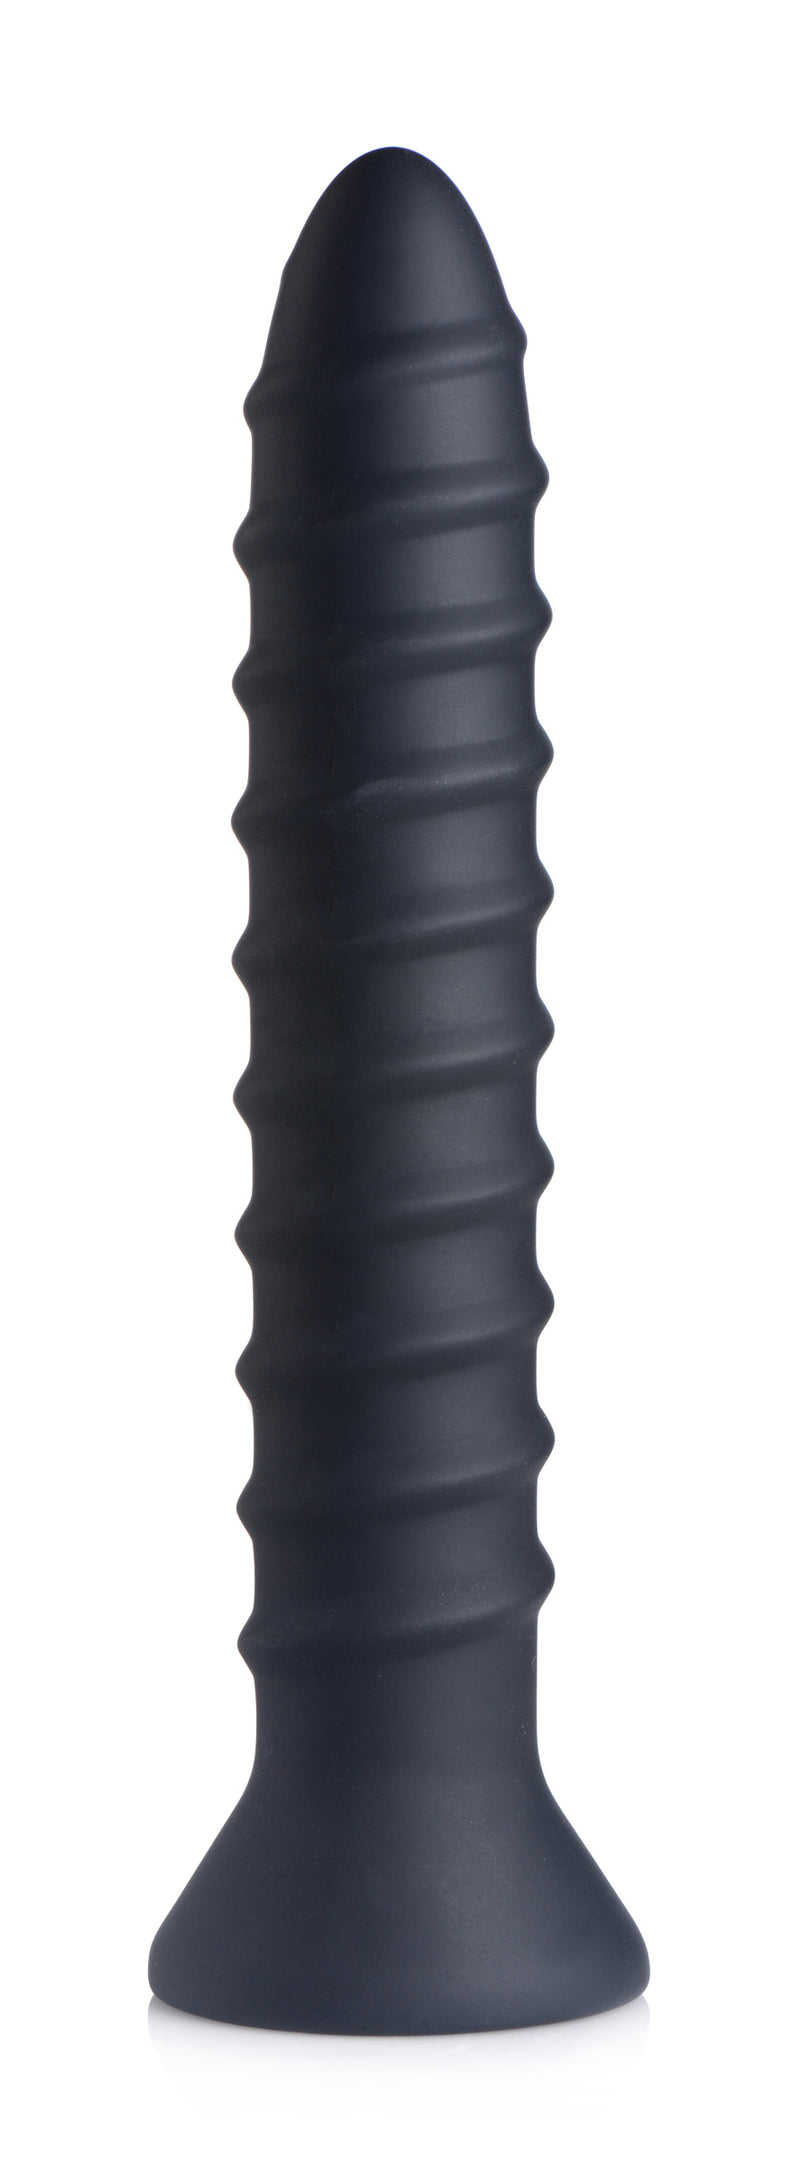 Power Screw 10X Spiral Silicone Vibrator vibesextoys from Master Series